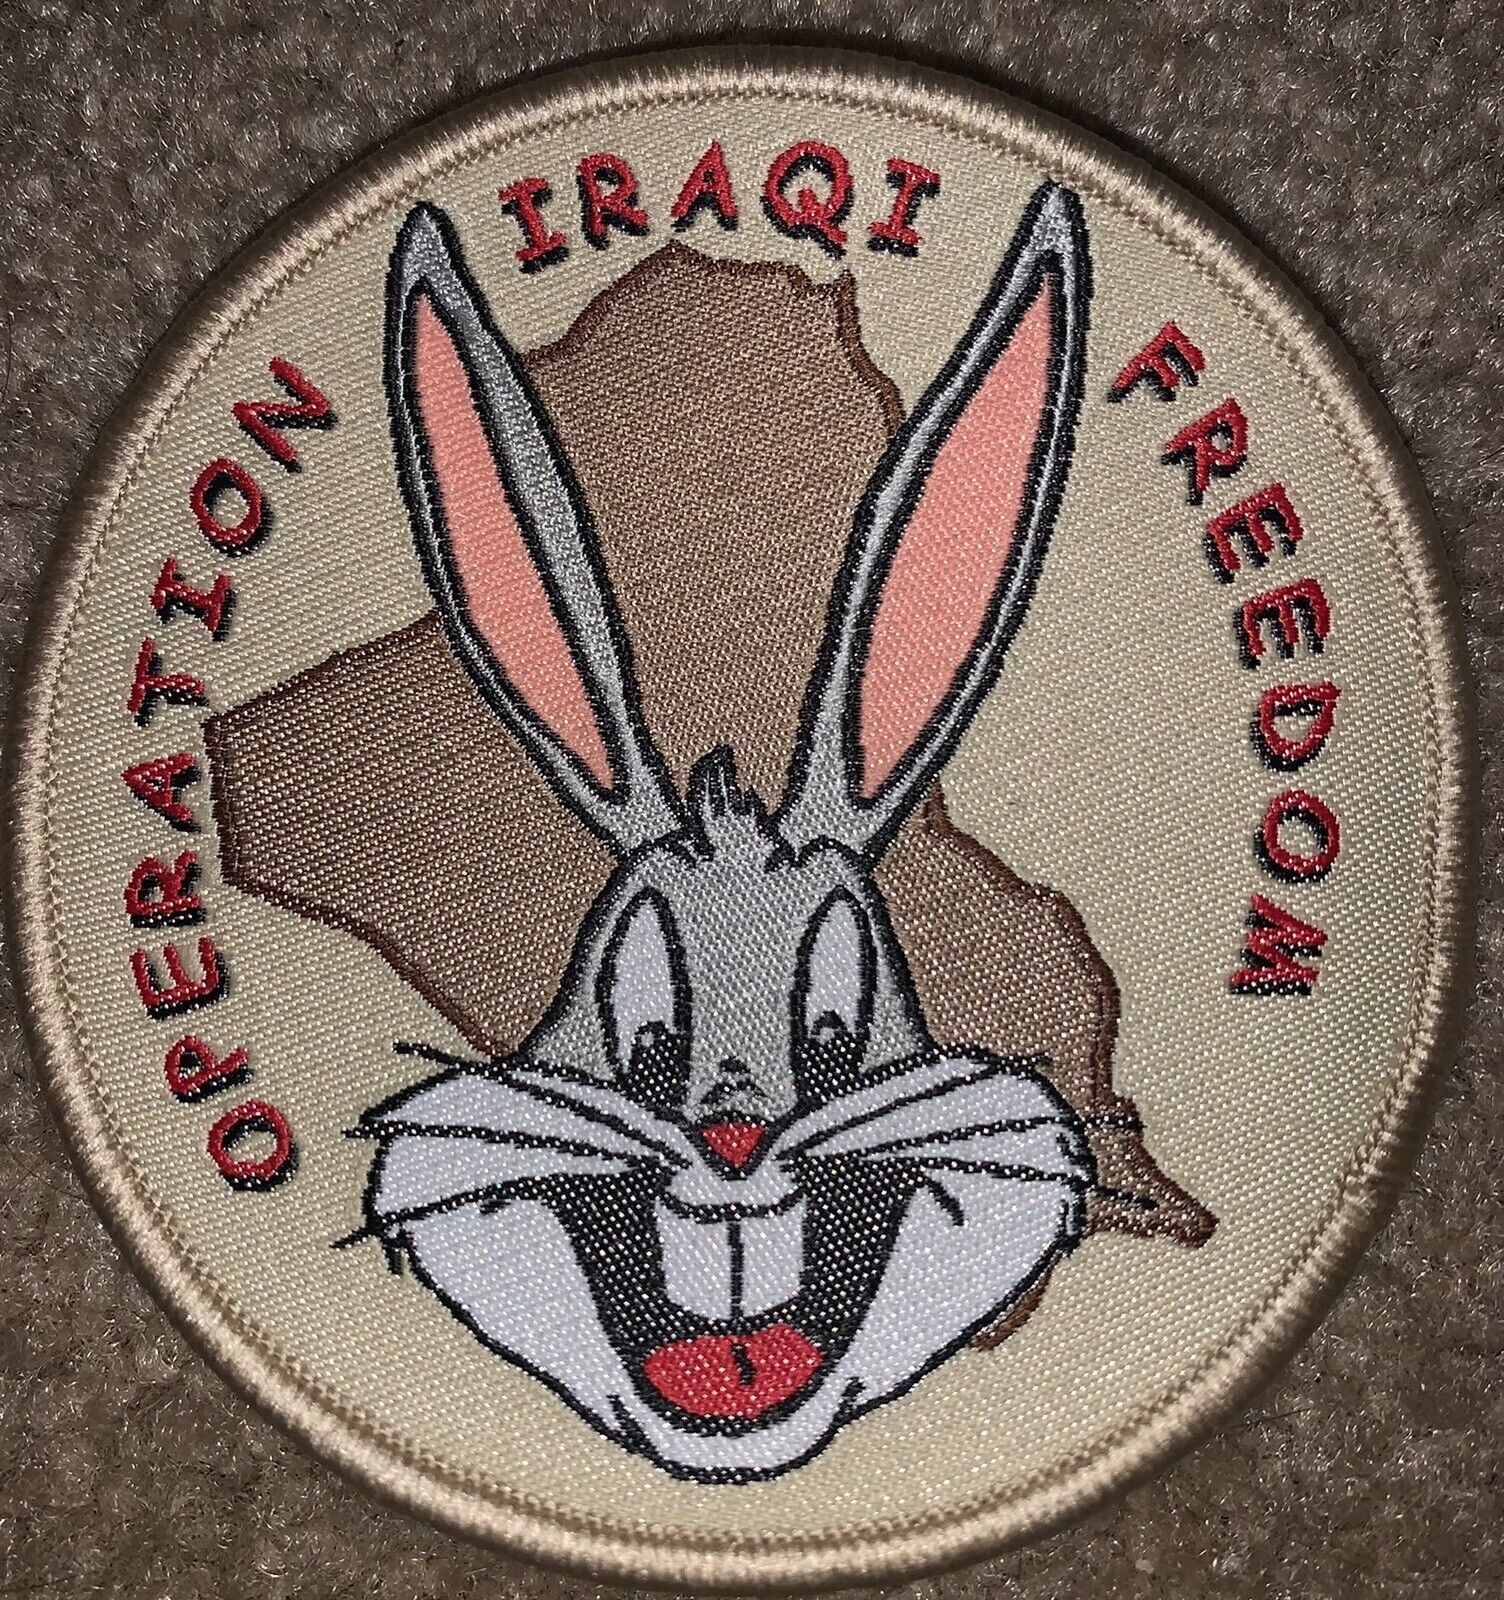 Operation Iraqi Freedom Bugs Bunny 4” Morale Patch